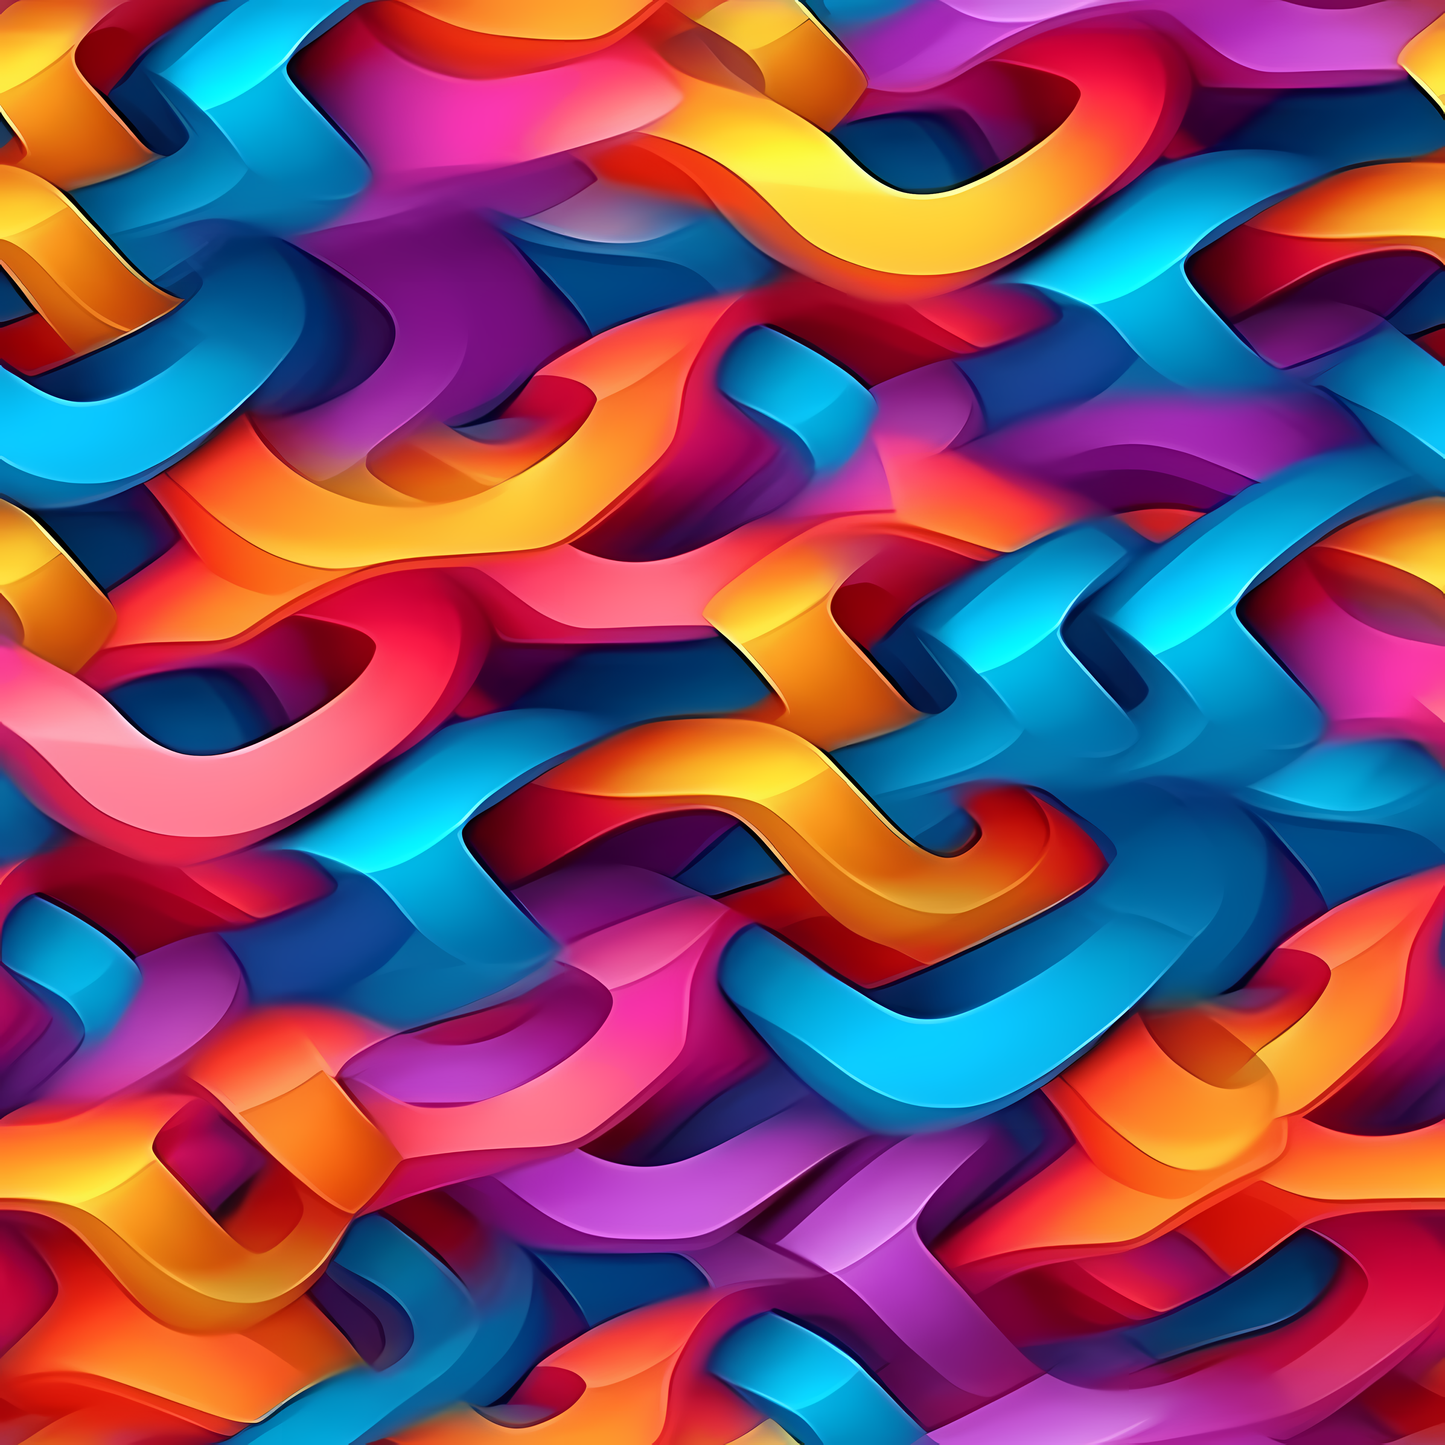 ABSTRACT MULTICOLORED